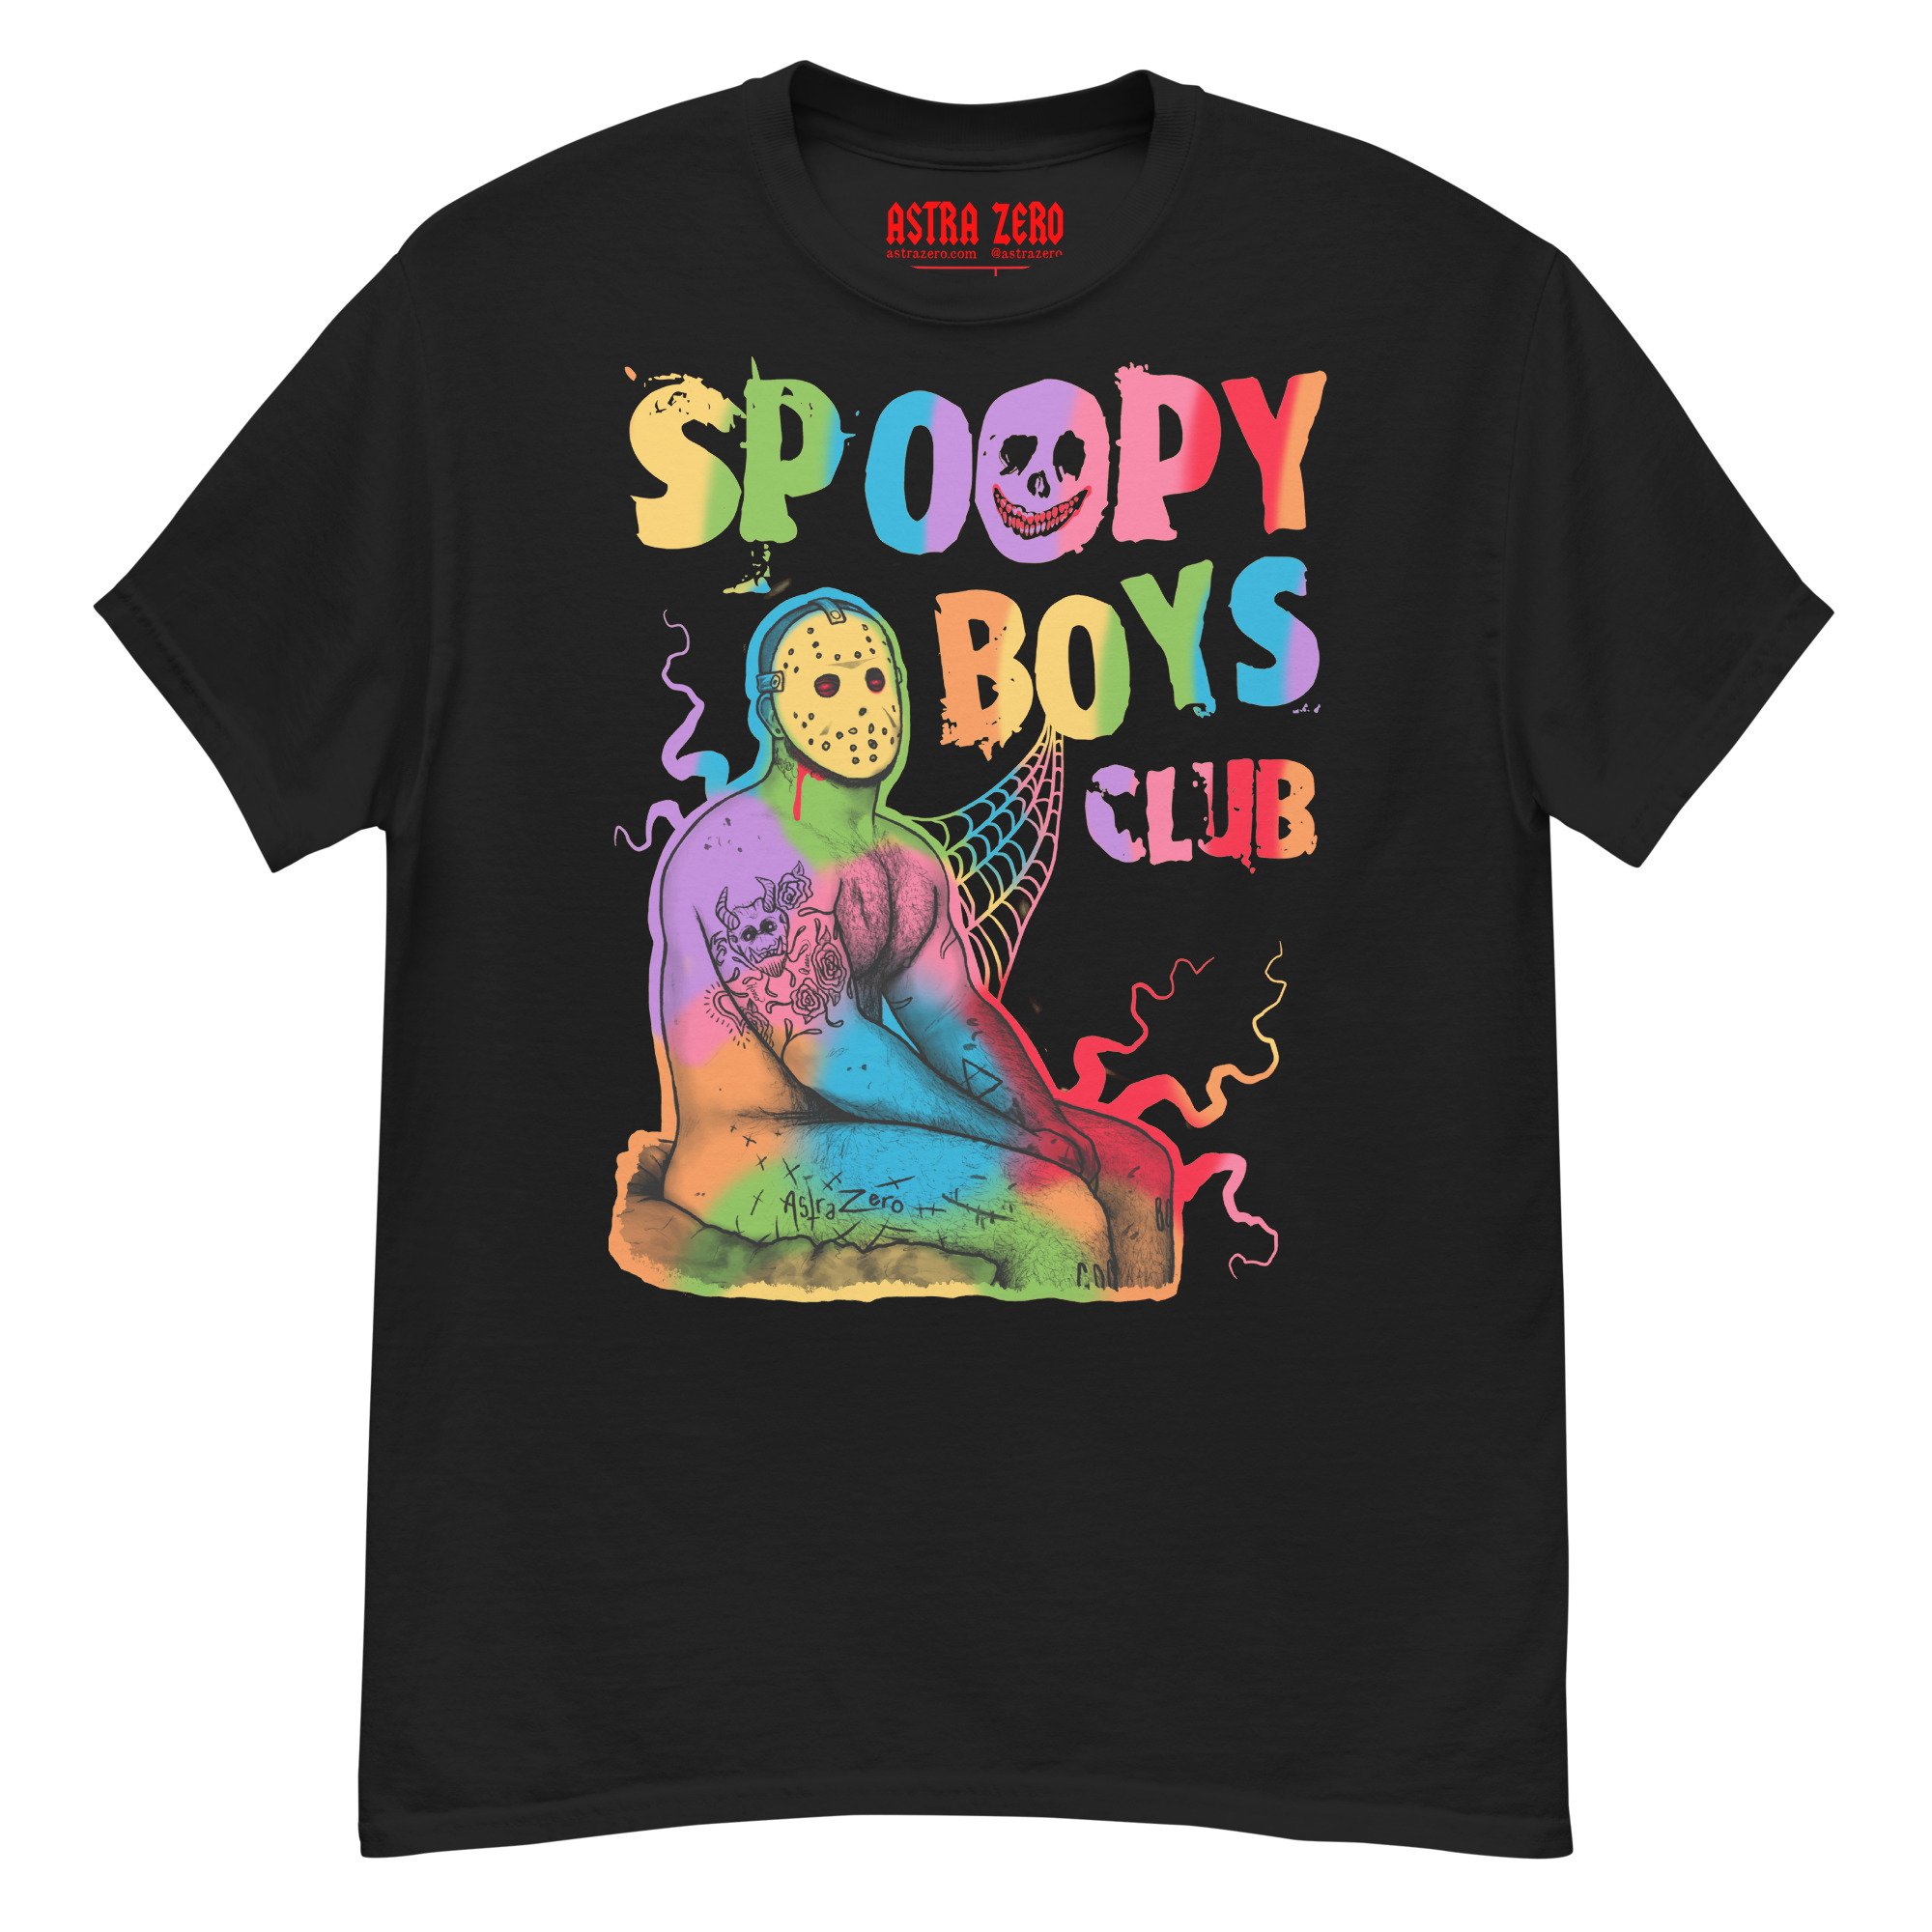 Featured image for “Spoopy Boys Club Pride Edition - Men's classic tee”